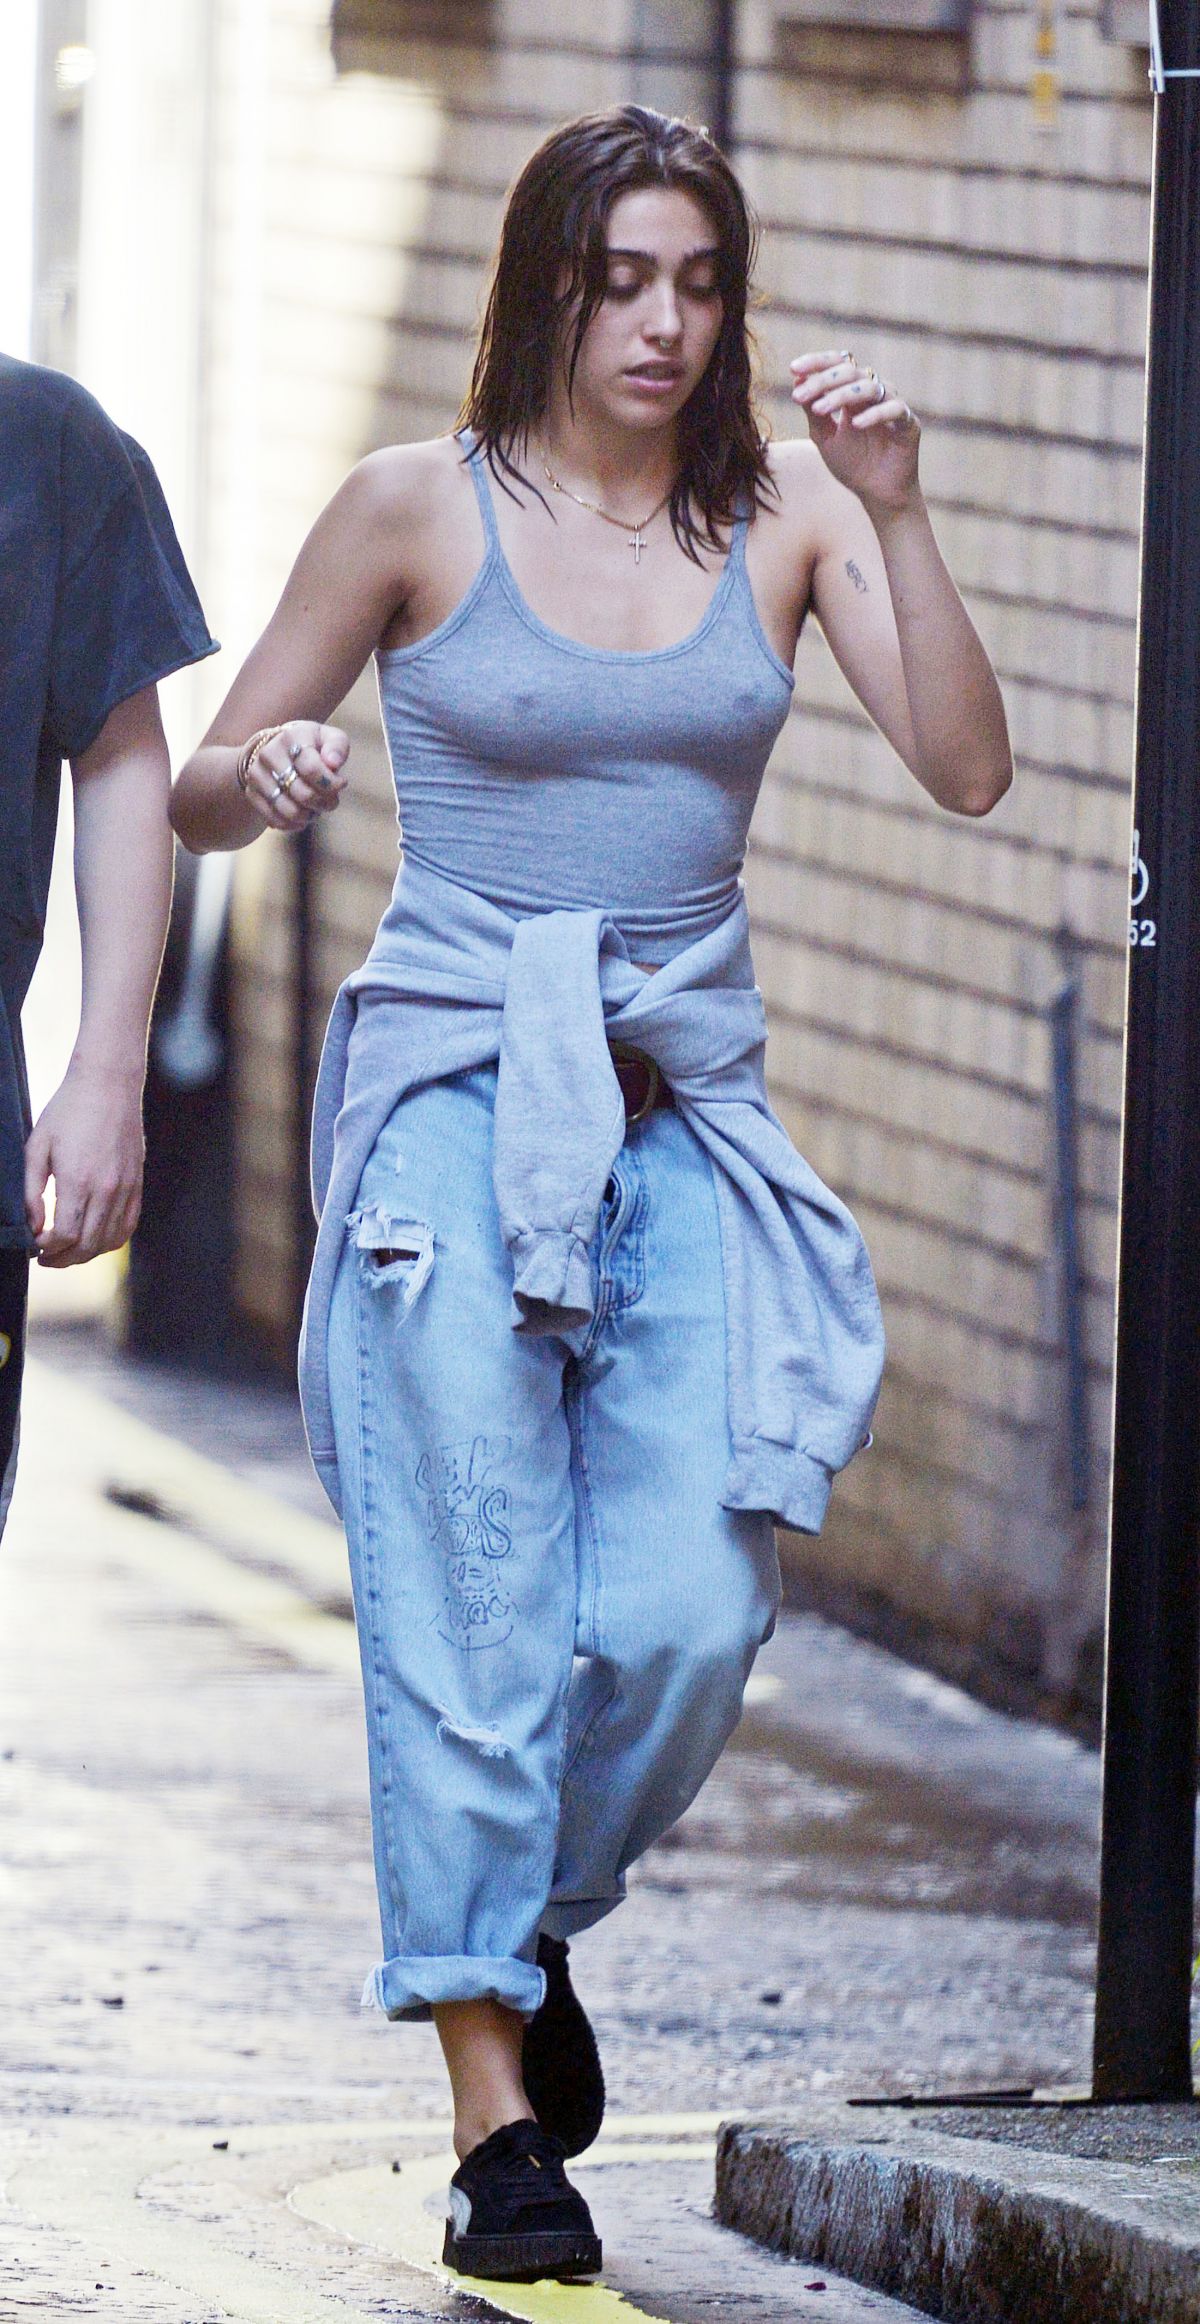 lourdes-leon-out-and-about-in-london-06-20-2016_4.jpg